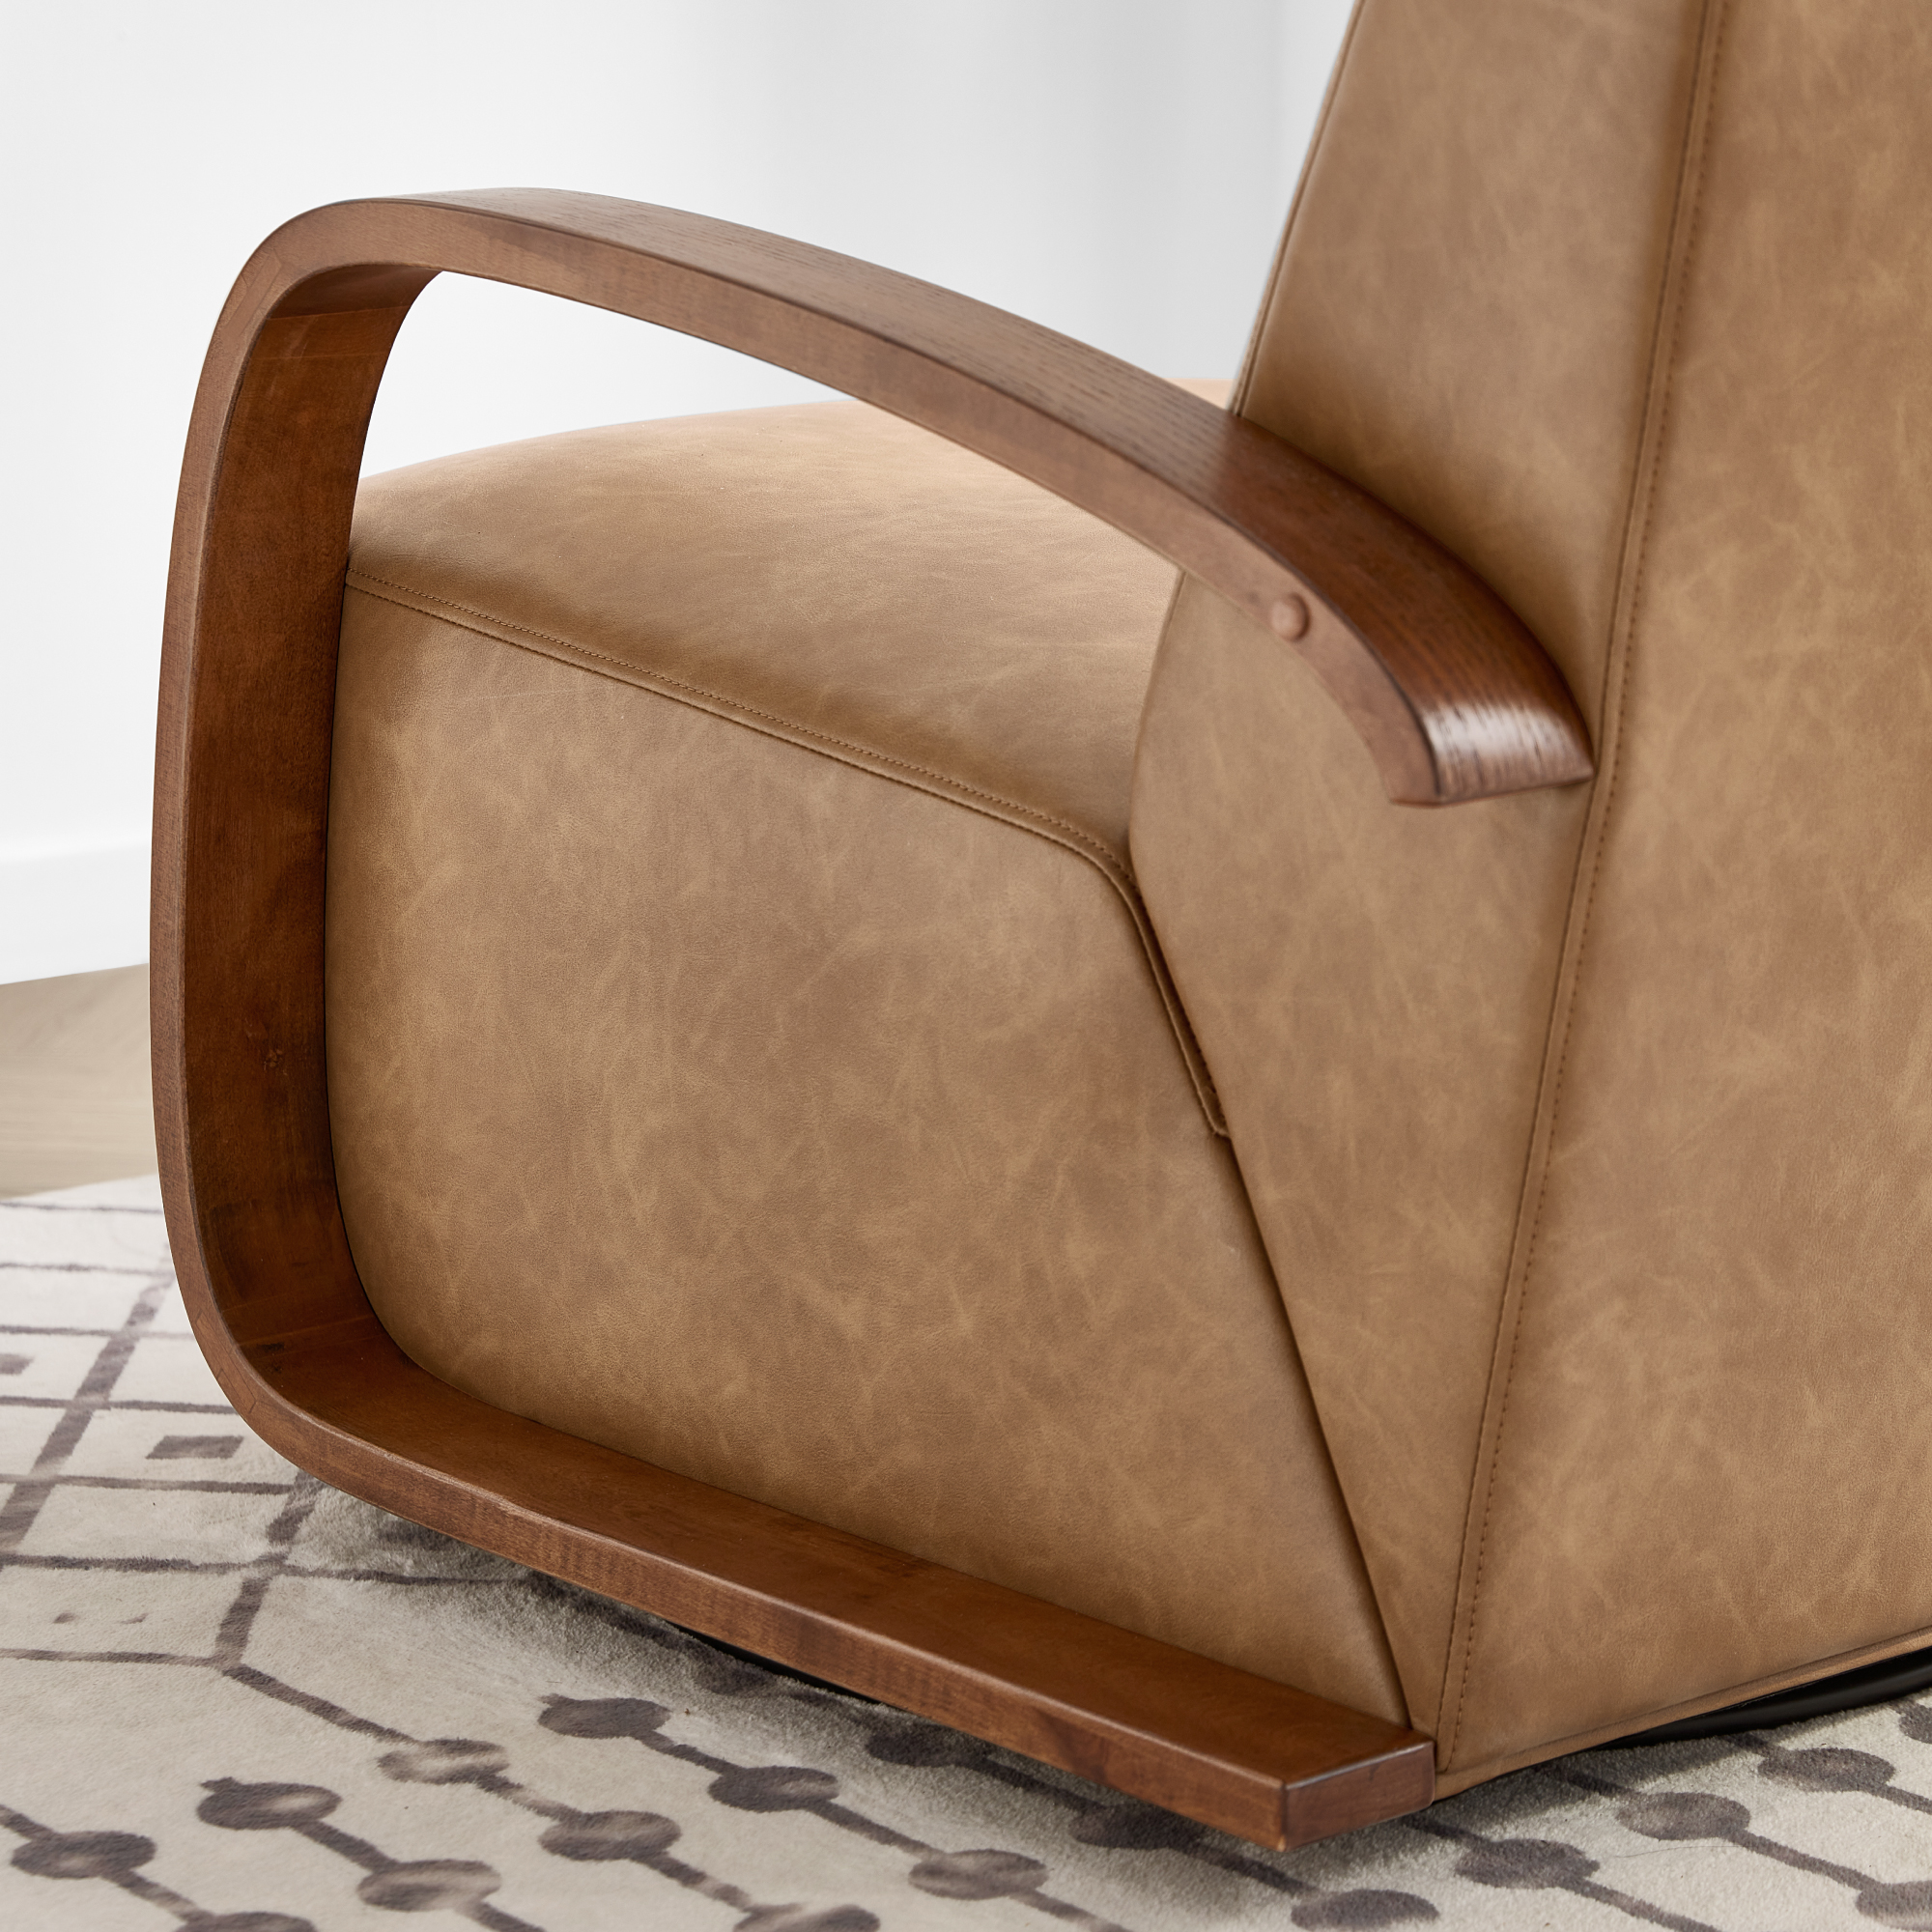 CHITA Swivel Accent Chair with U-shaped Wood Arm for Living Room Beedroom, Cognac Brown & Walnut - image 5 of 14